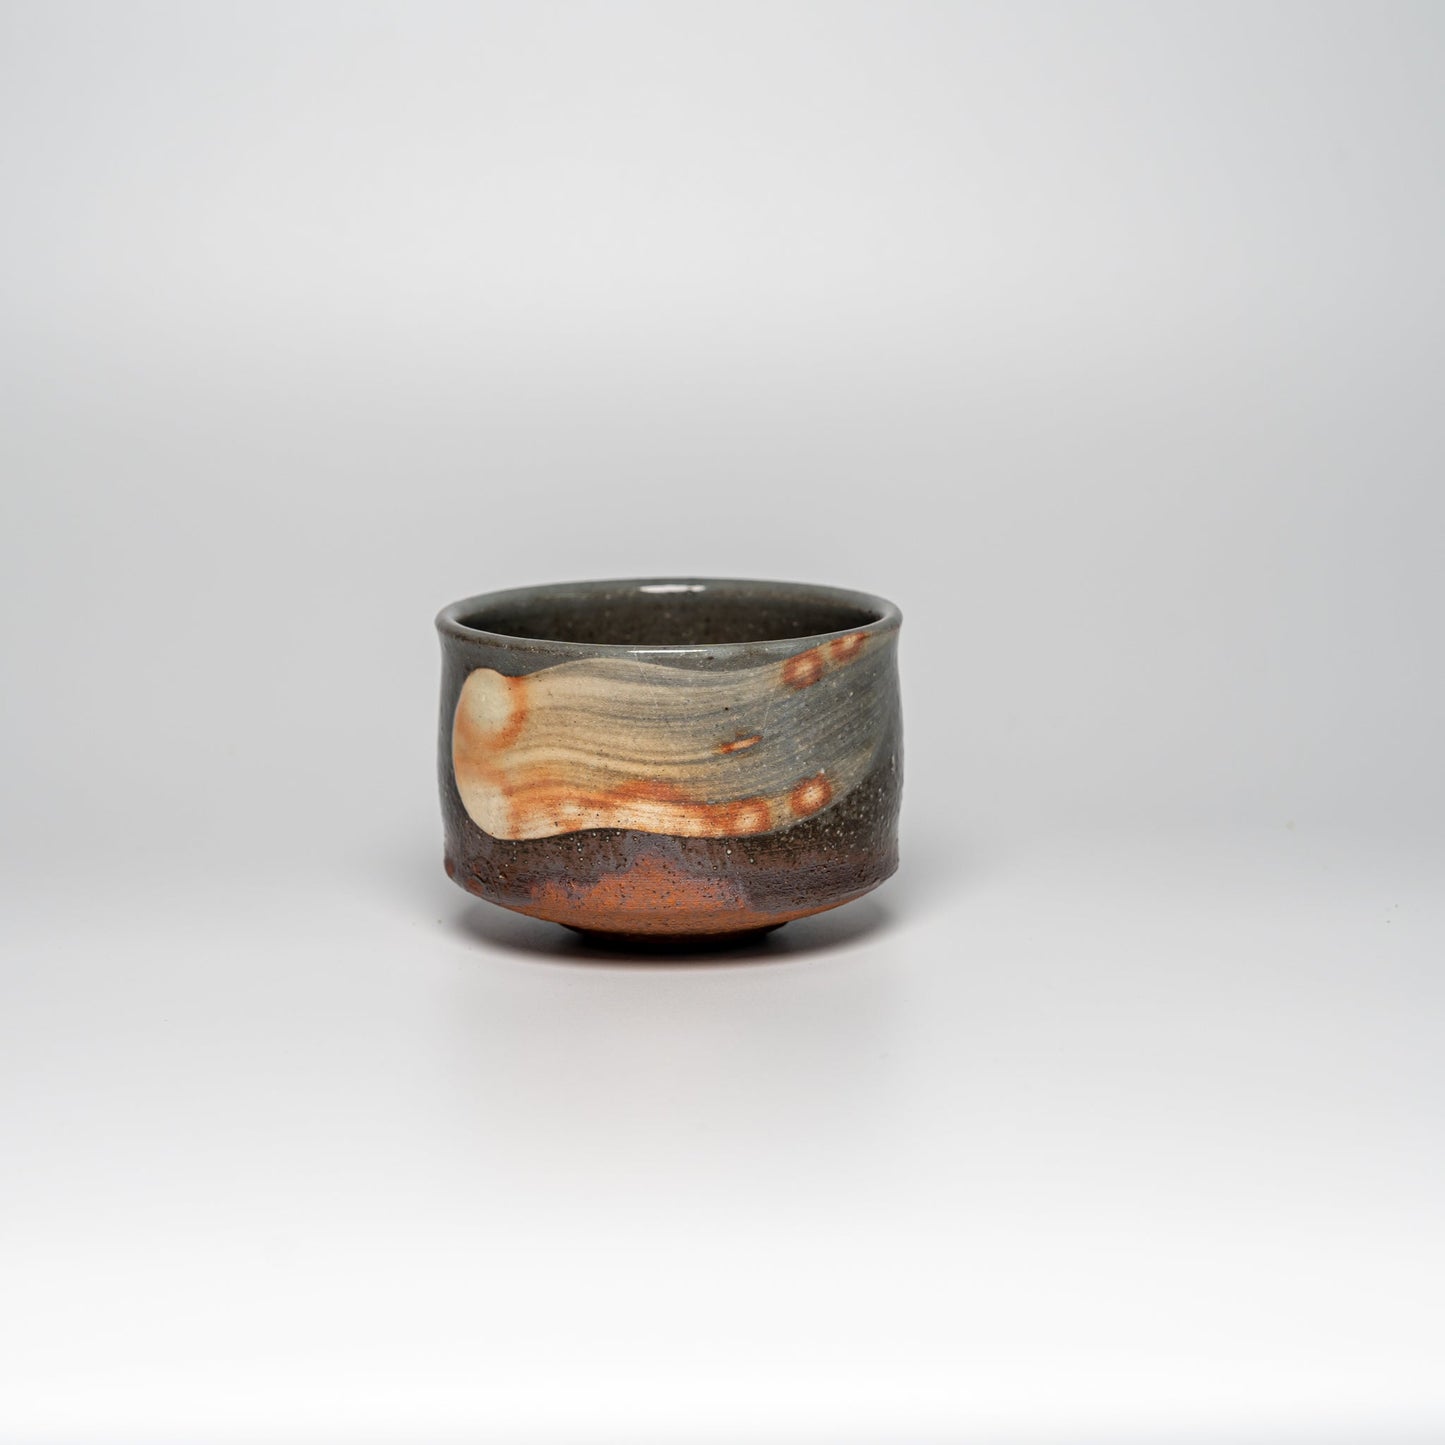 A brushed Hagi yaki cup on a white background